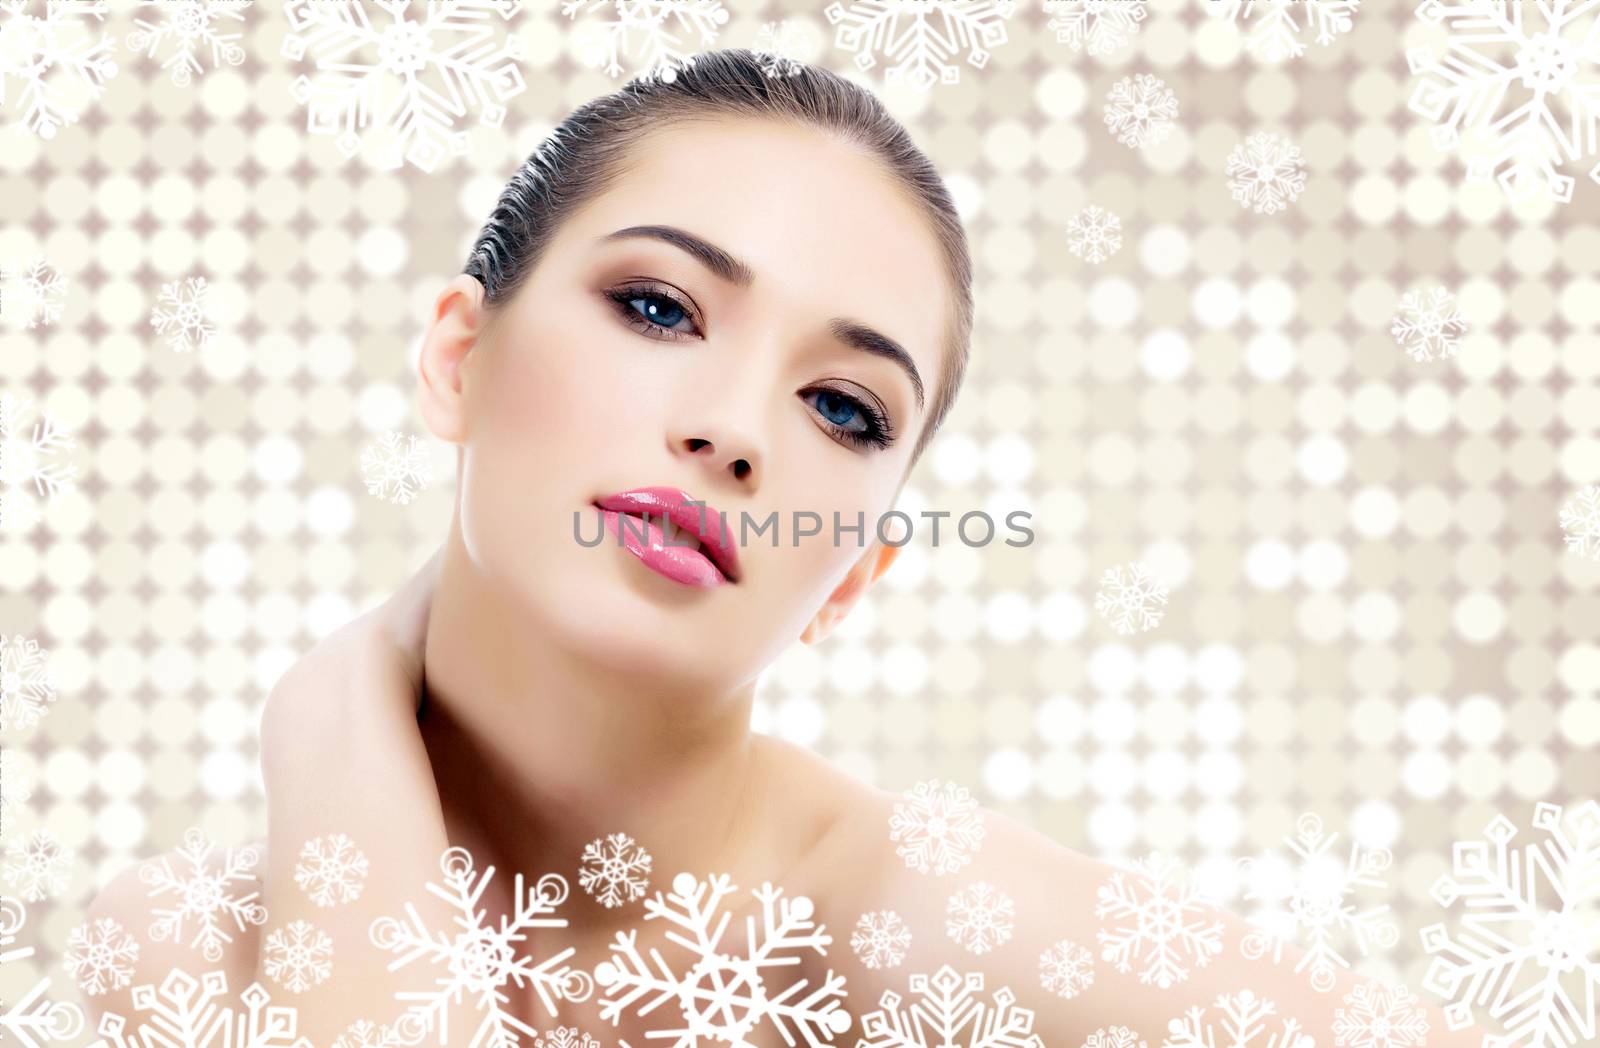 Pretty woman against an abstract background with circles and sno by Nobilior